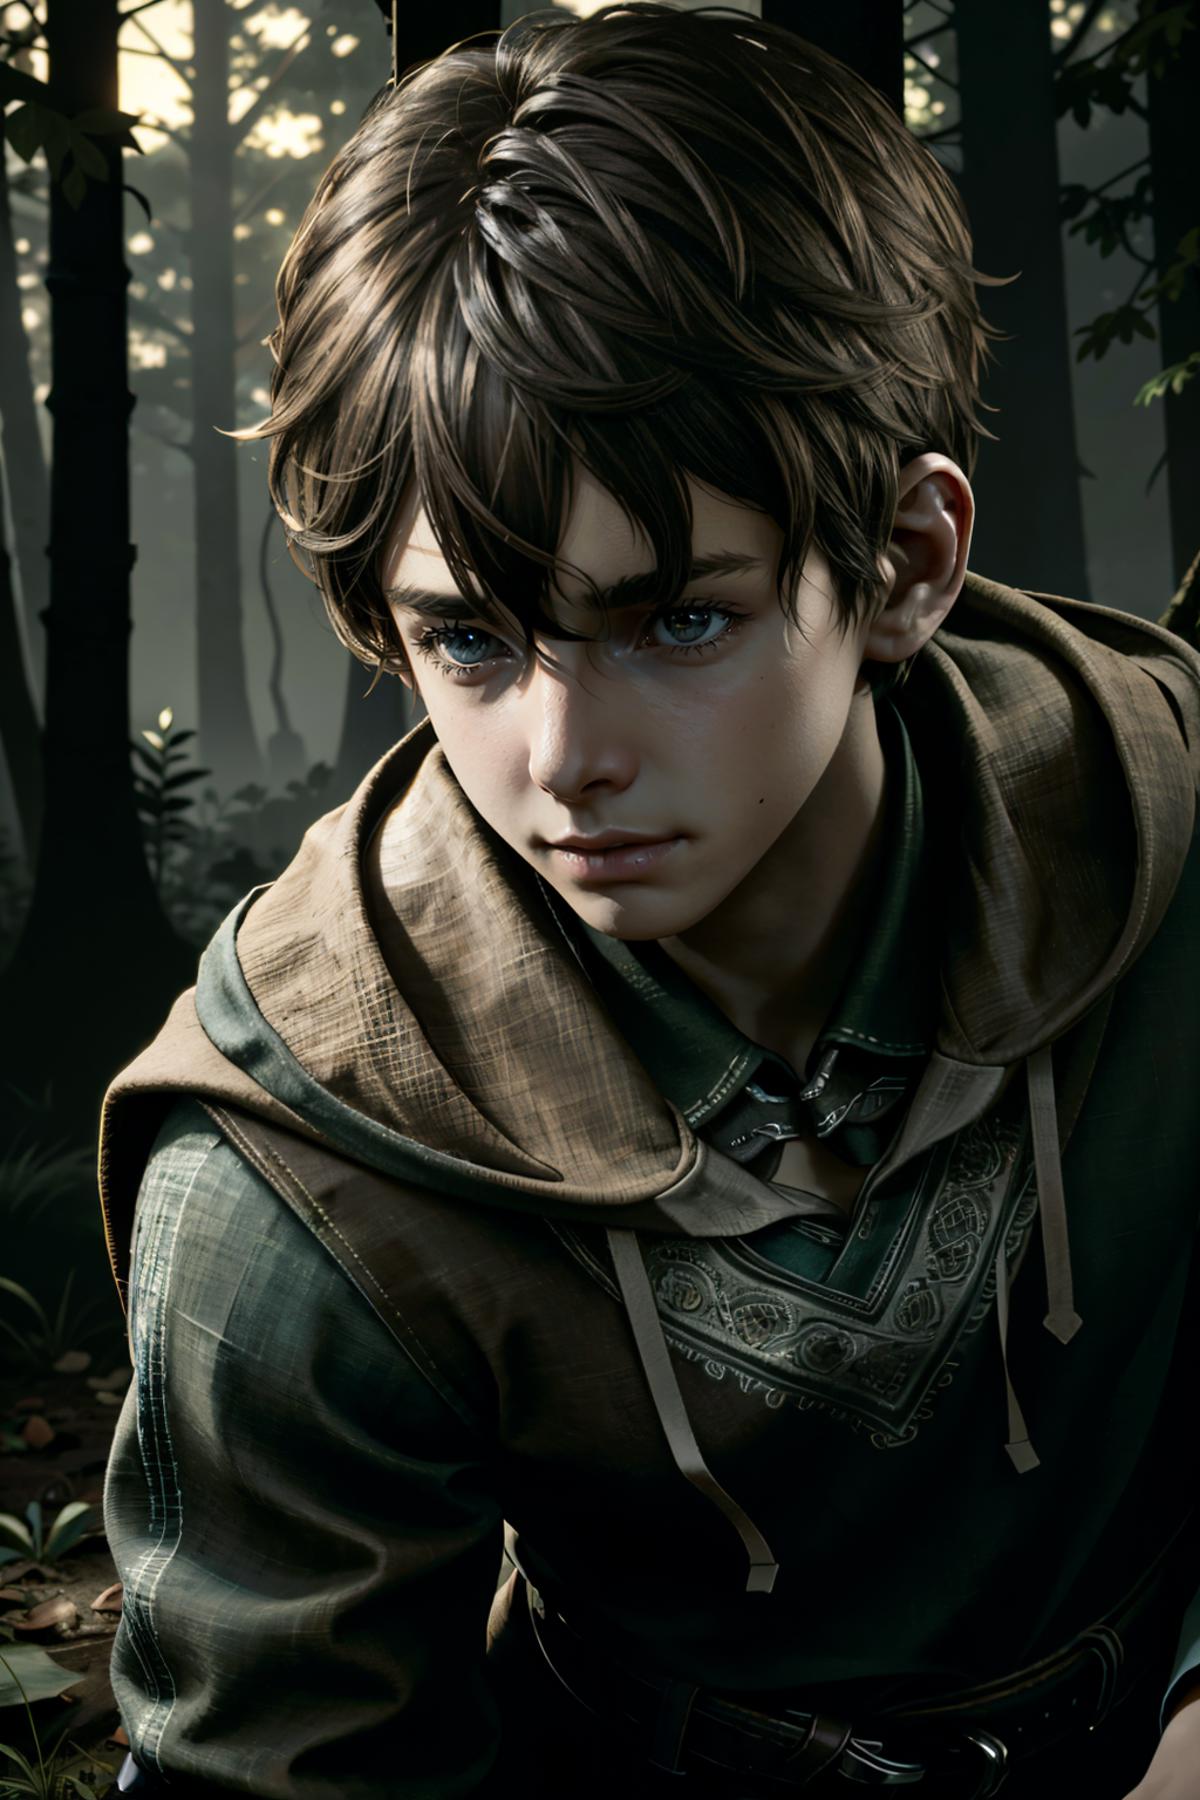 Lucas from A Plague Tale image by BloodRedKittie